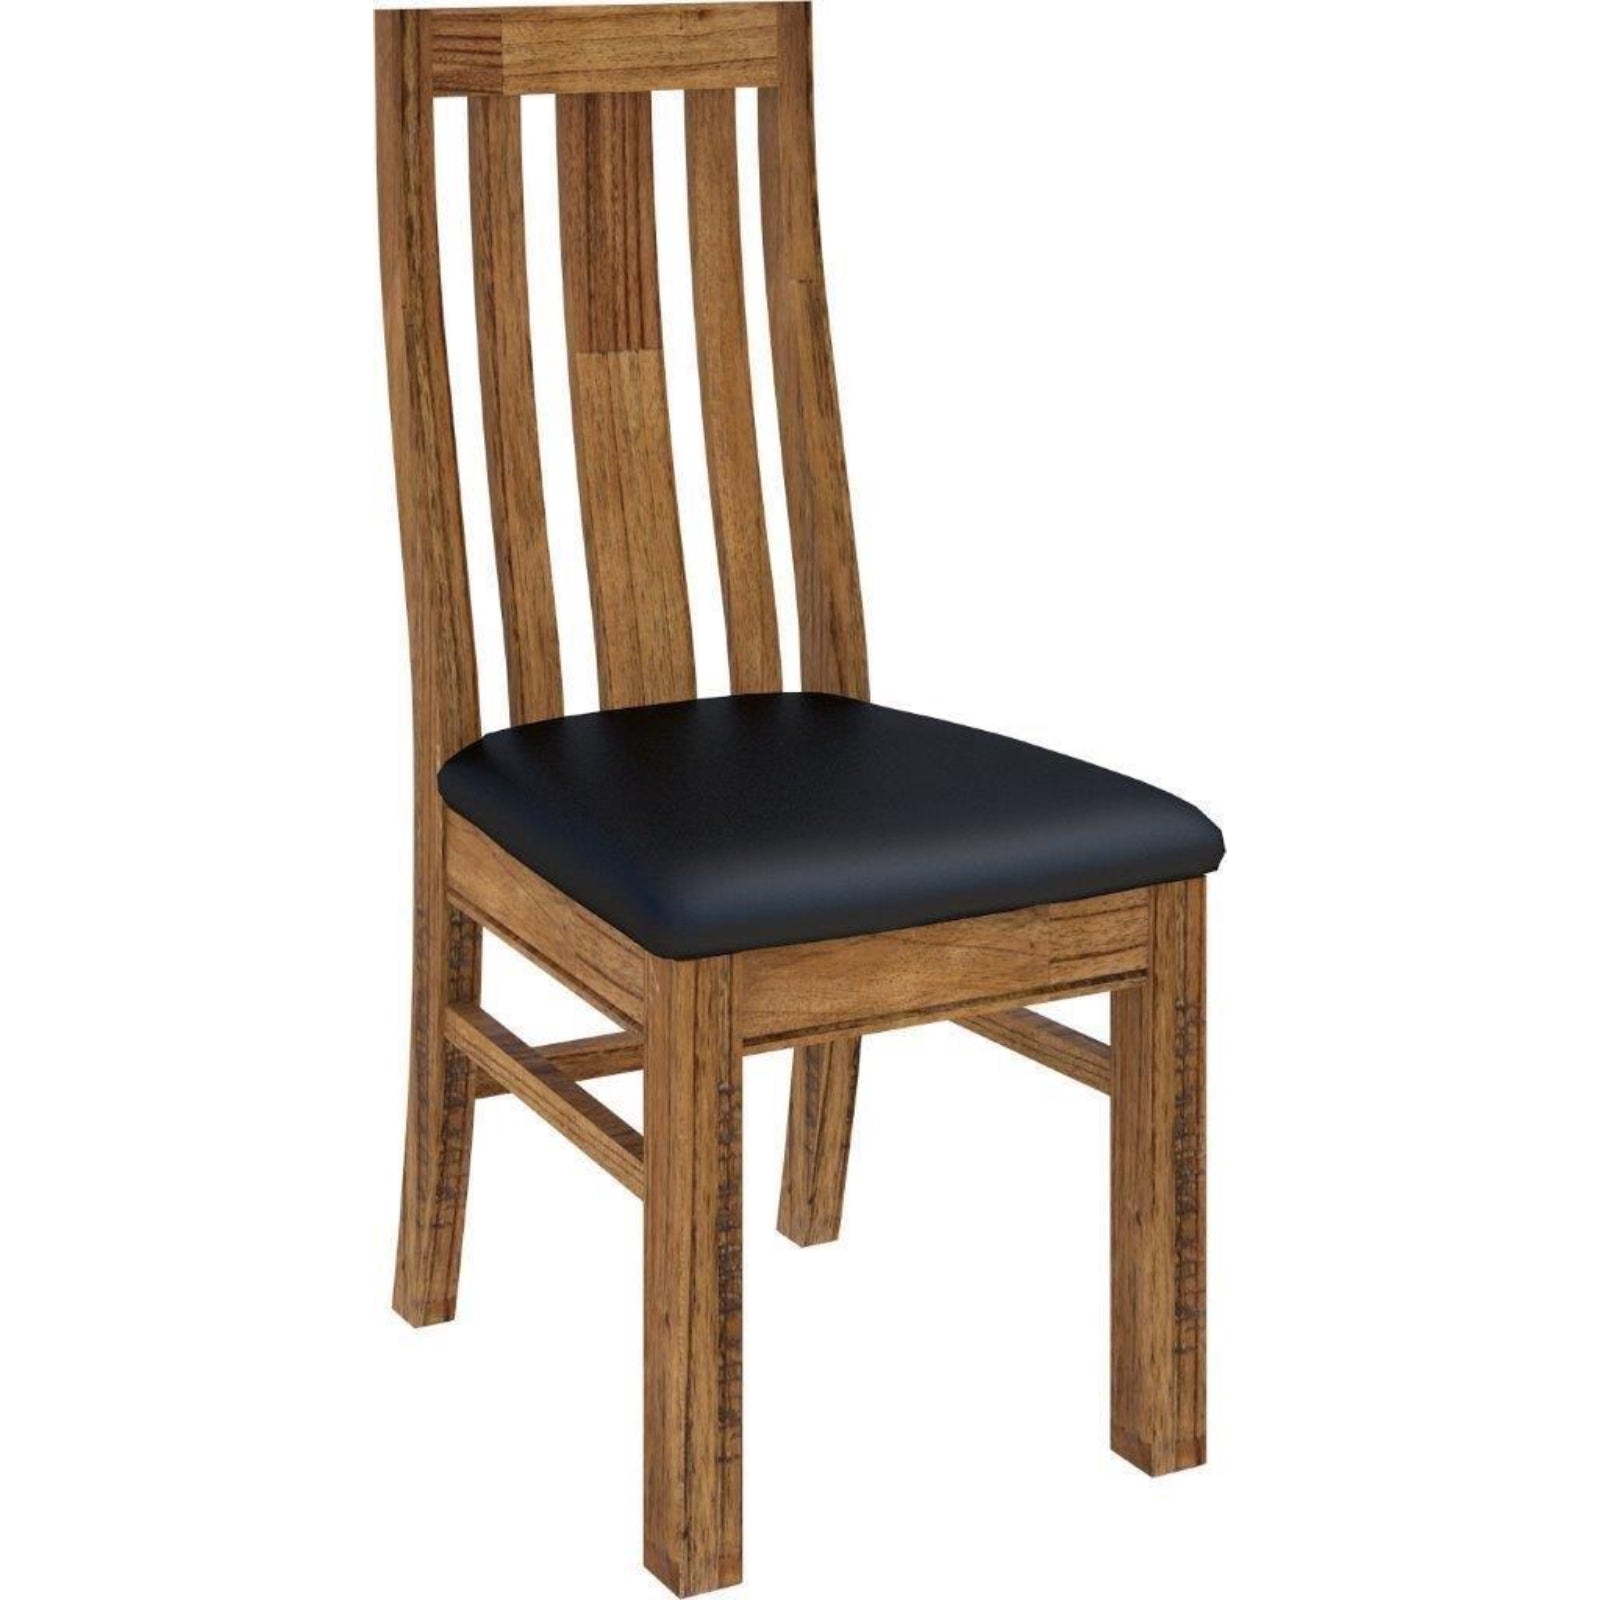 birdsville-pu-seat-dining-chair-set-of-2-solid-ash-wood-dining-furniture-brown